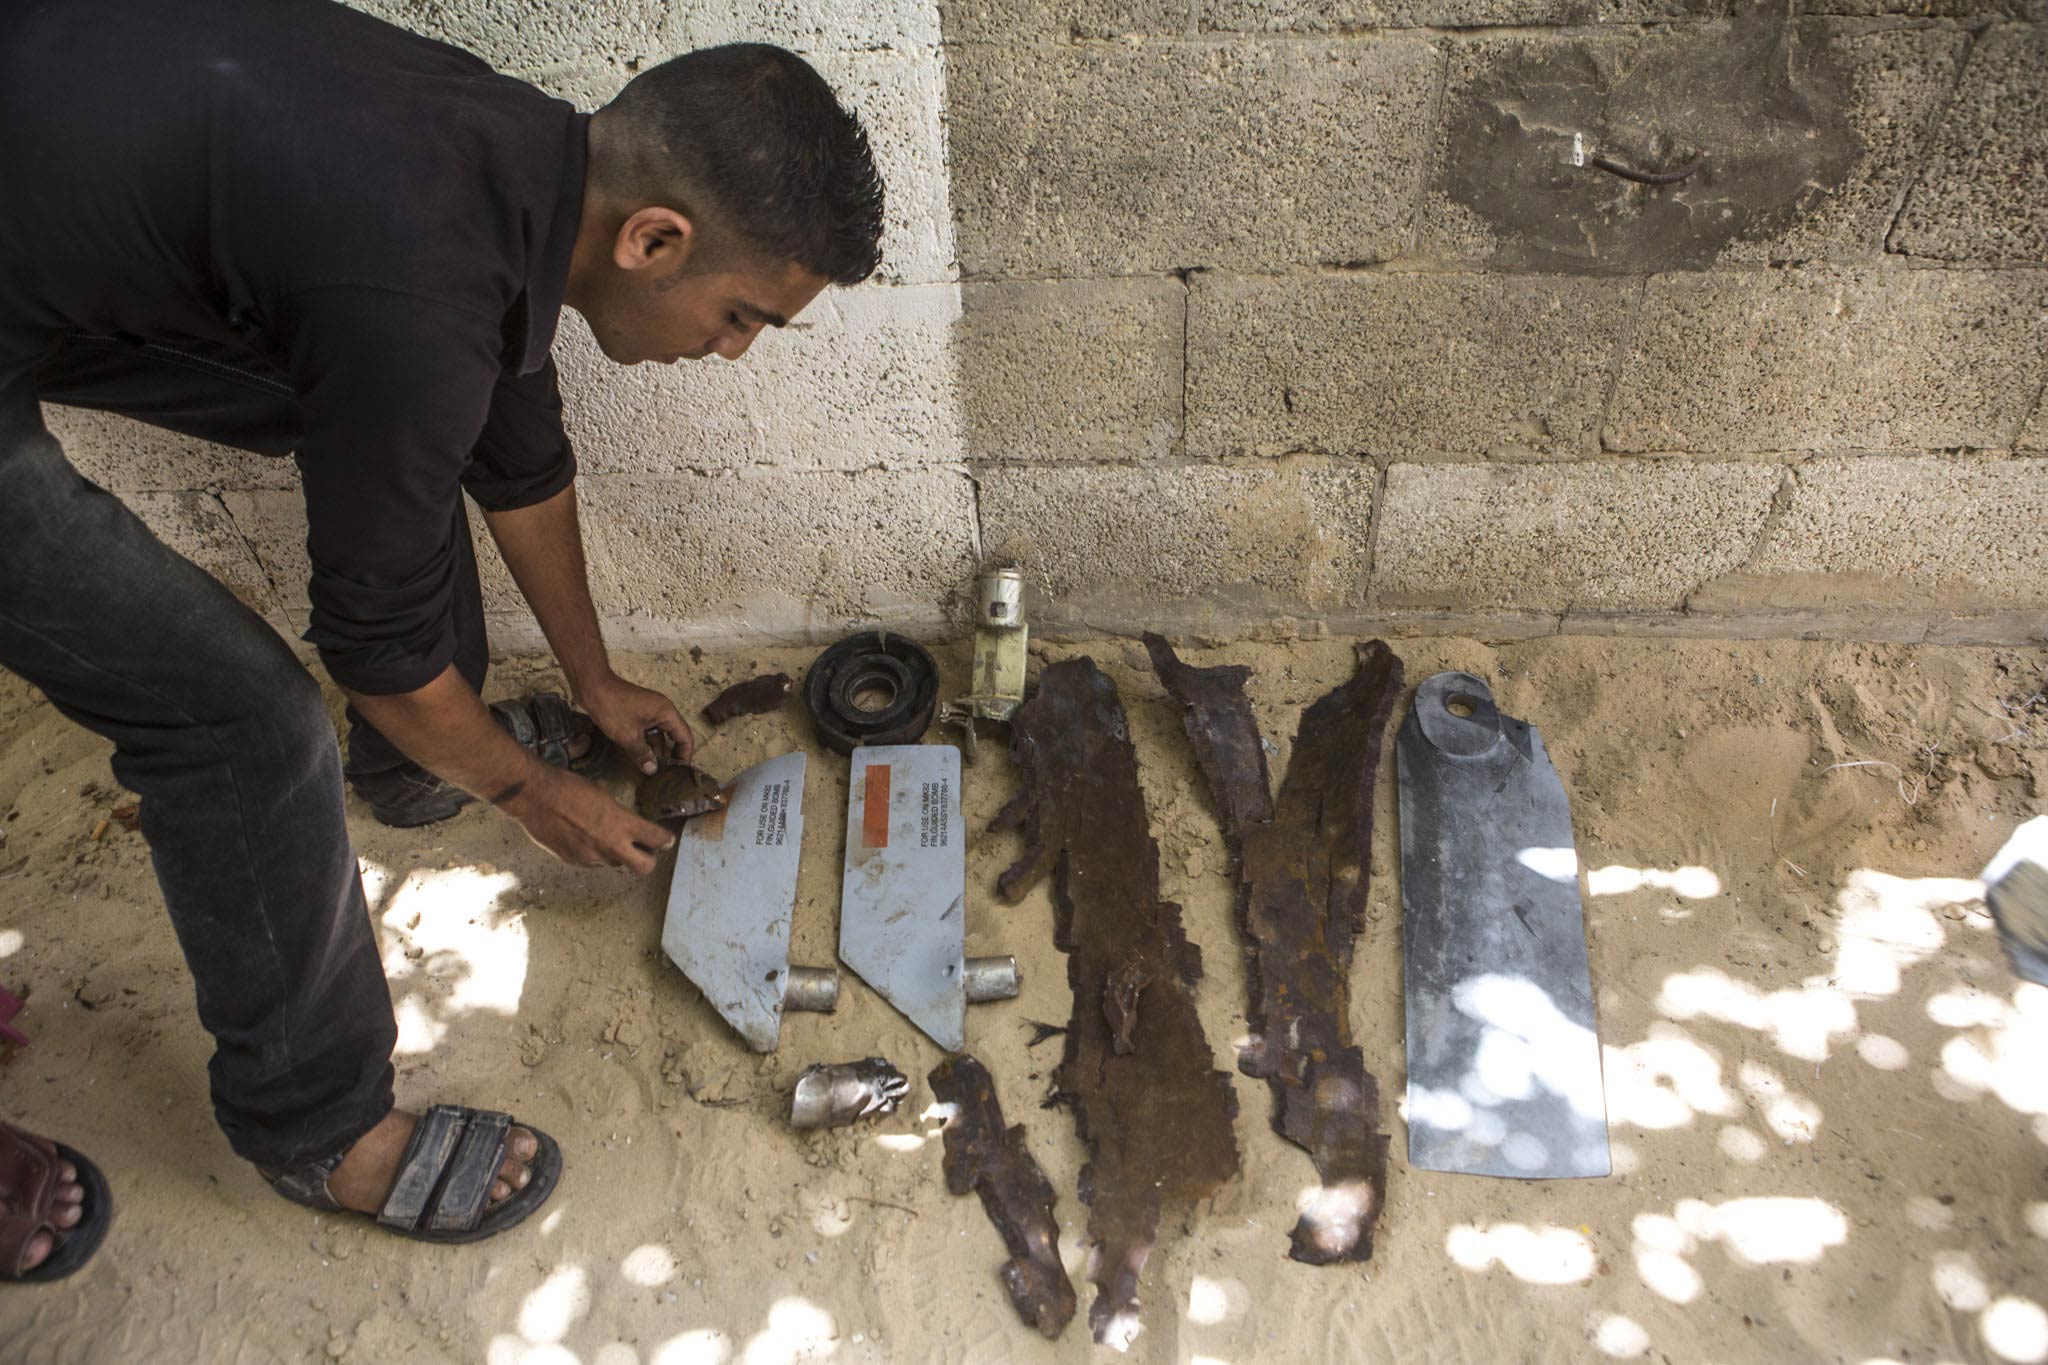 Pieces of the bomb that was dropped on the al-Louh family. The two grey elements are the fins of a guided bomb, so-called ‘smart bomb’. They help steer it, so that it hits the target precisely – in this case a house with Rafat's sleeping family inside.
